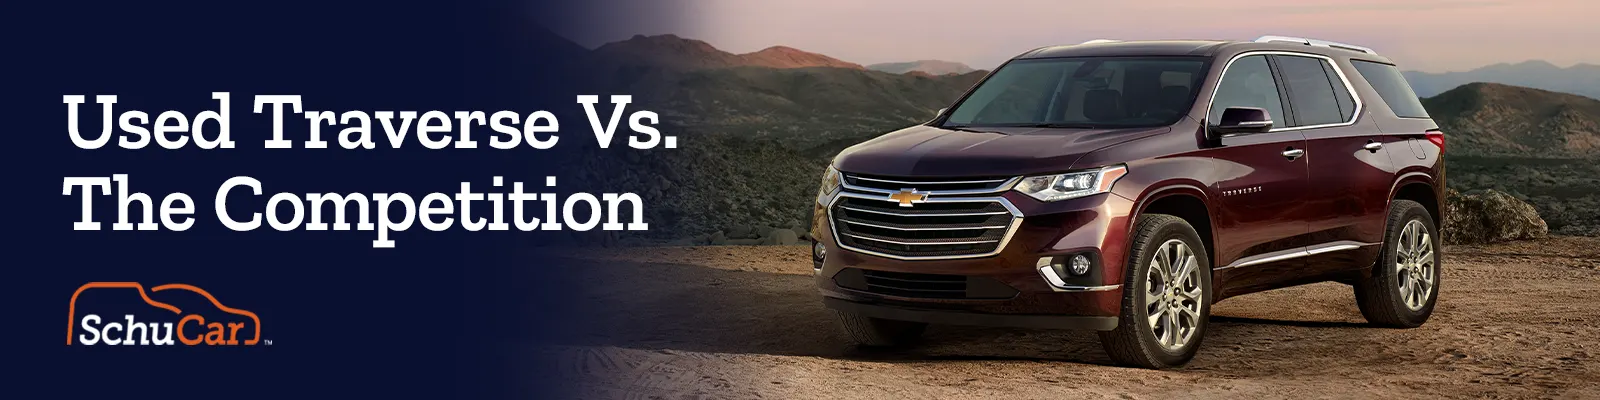 Used Chevrolet Traverse vs. the Competition | SchuCar